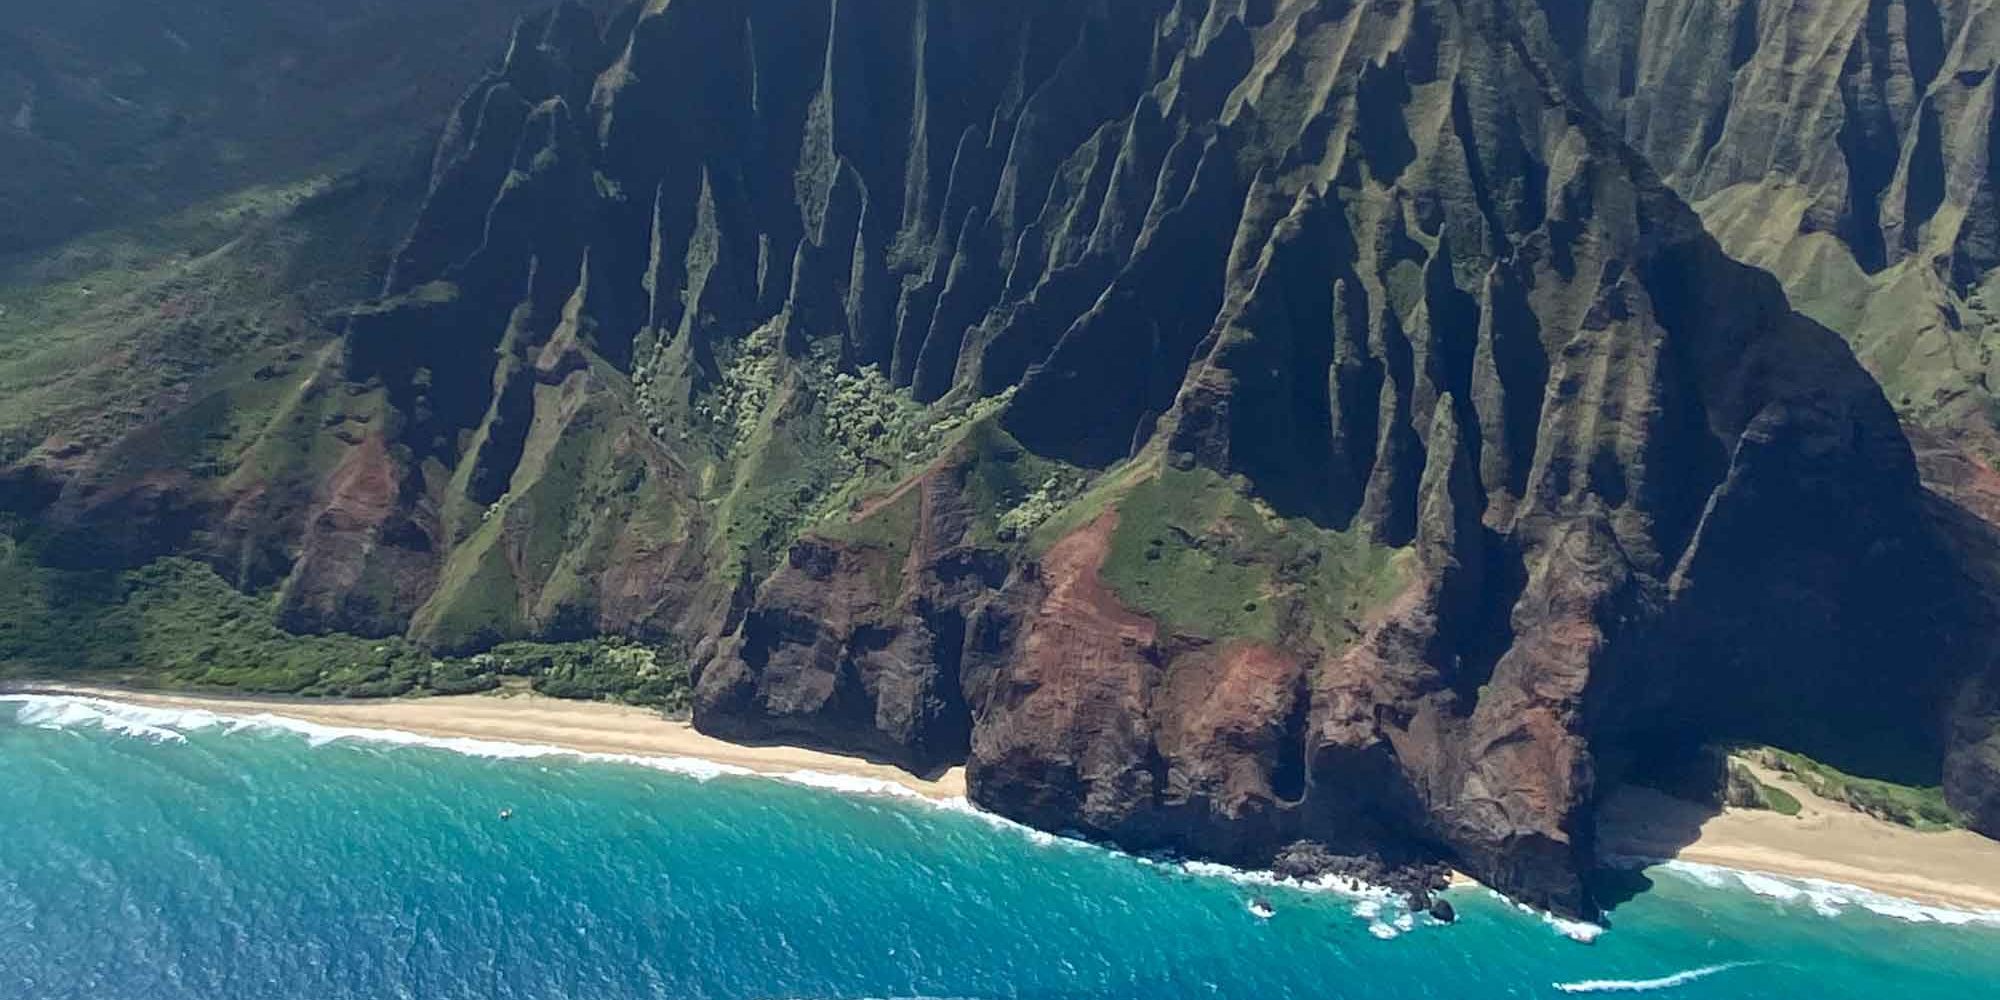 Views of Kalalau Beach from a helicopter